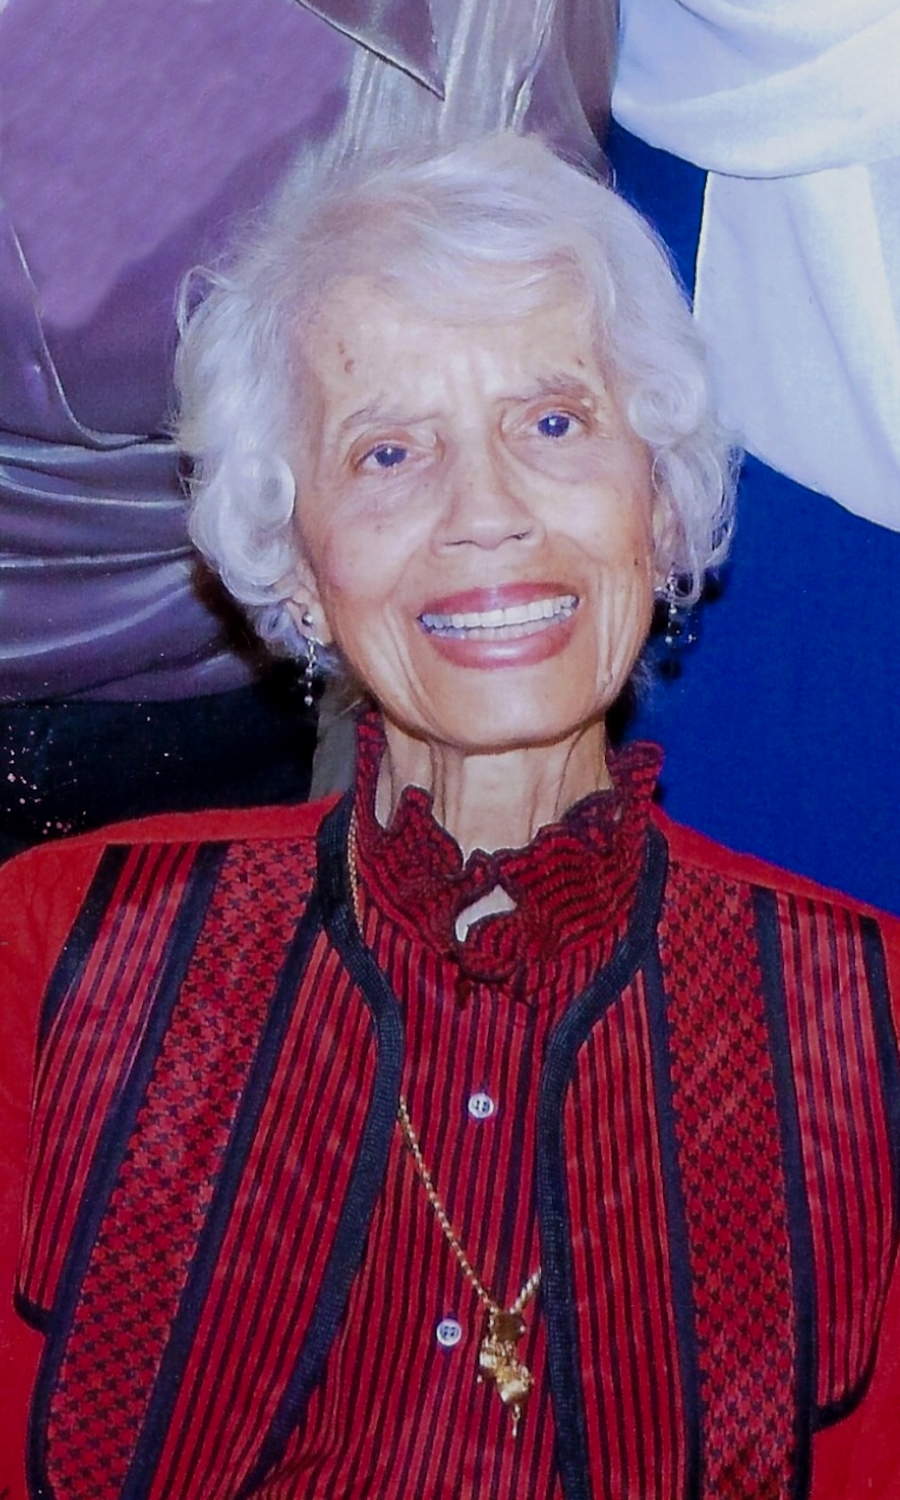 An African American woman in a red and black striped shirt